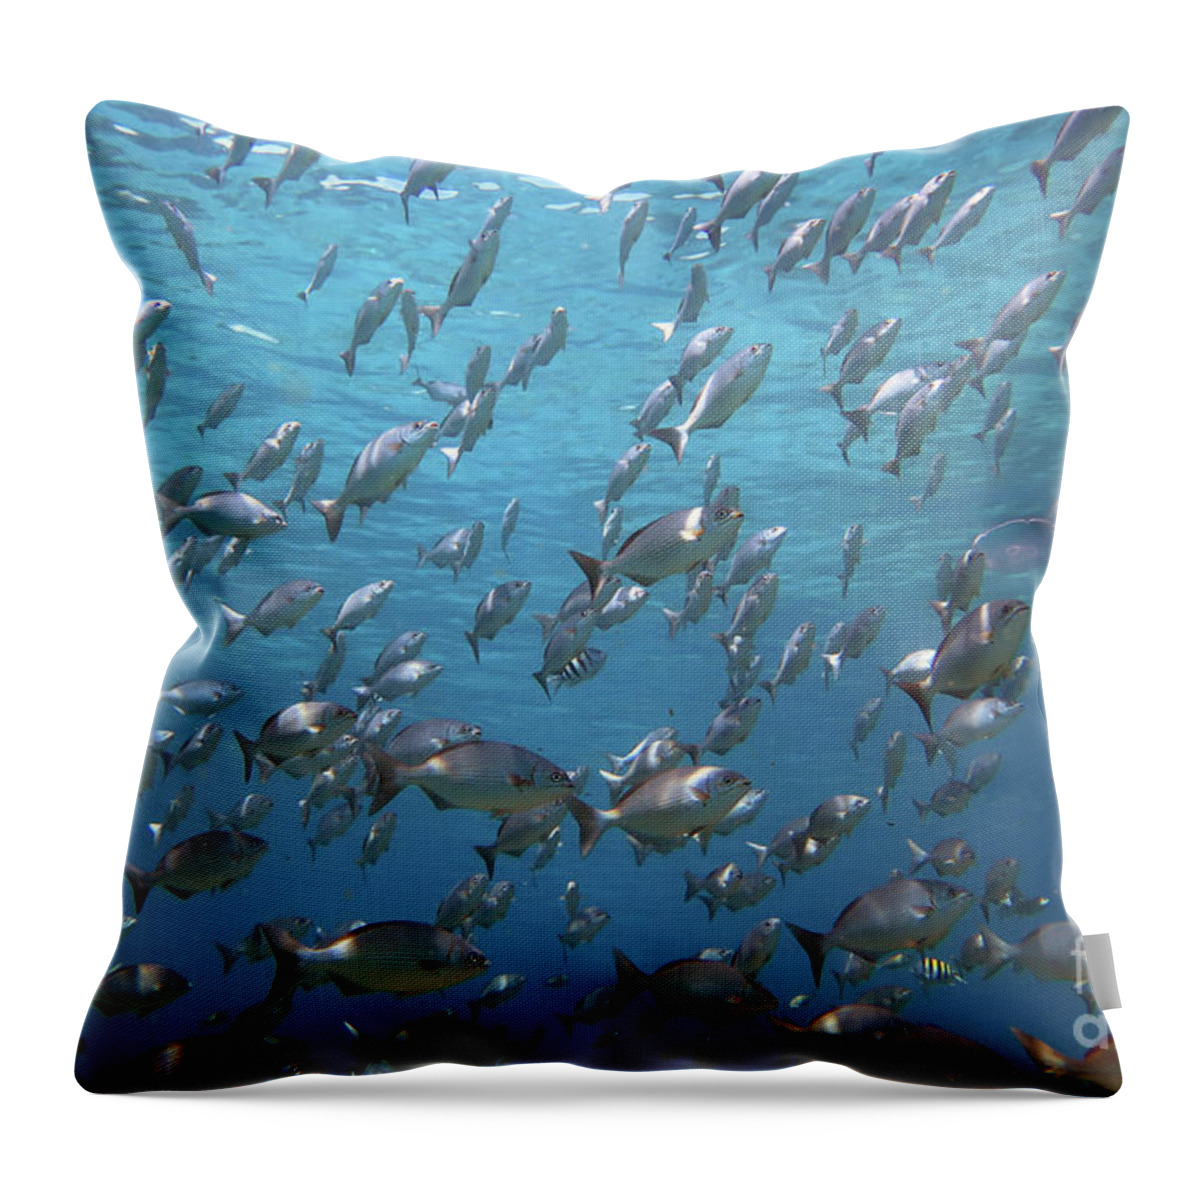 Unnderwater Throw Pillow featuring the photograph Chub Convention by Daryl Duda